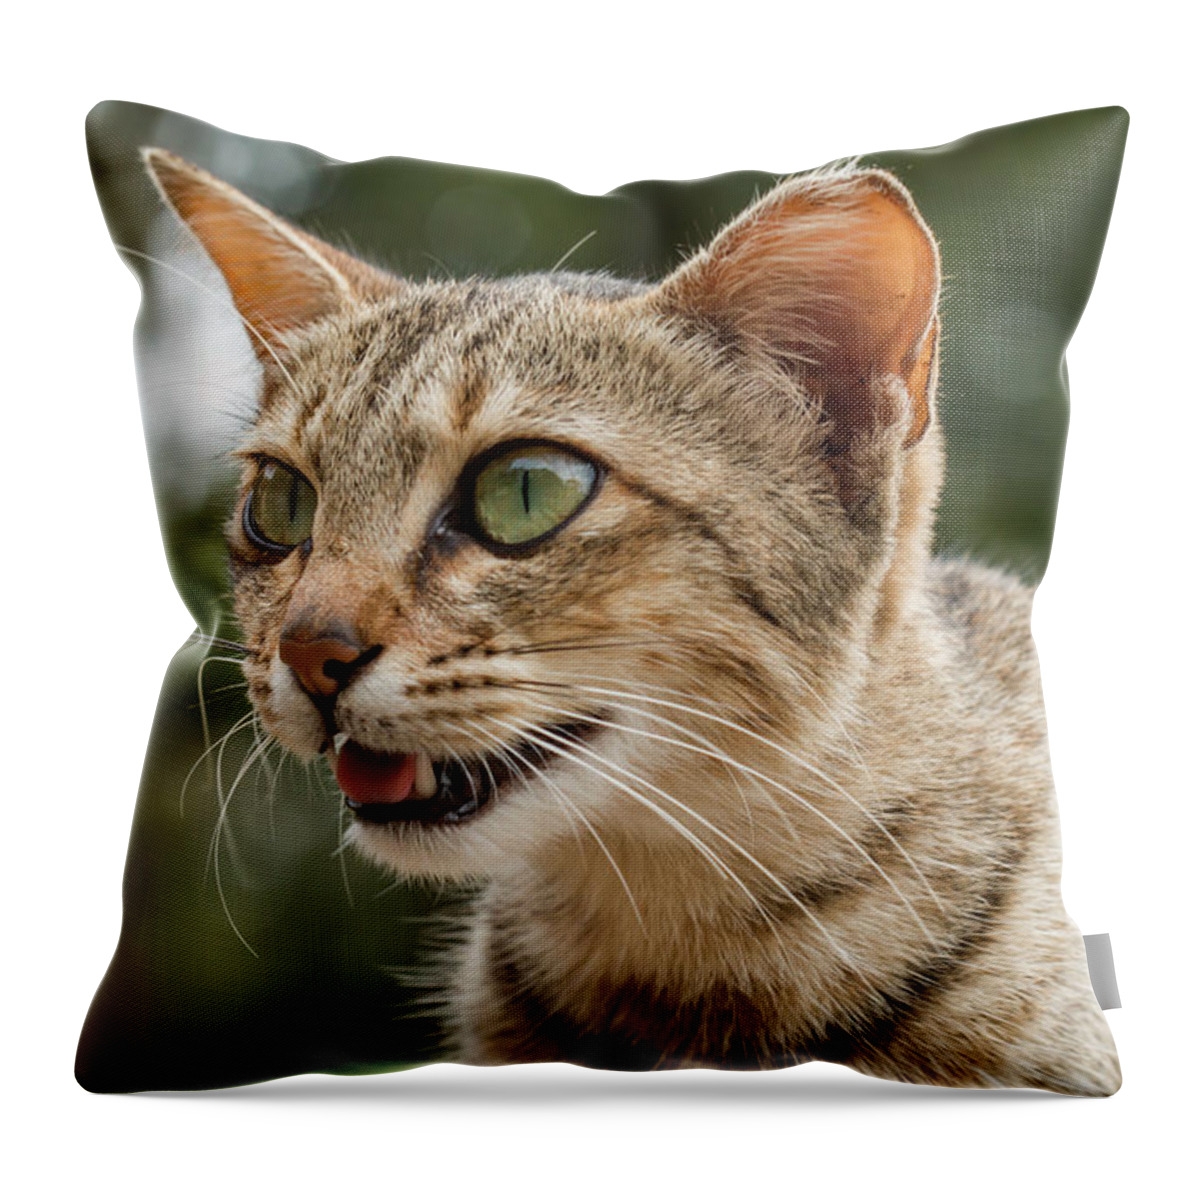 Cat Throw Pillow featuring the photograph Oh God What Am I Seeing by Ramabhadran Thirupattur